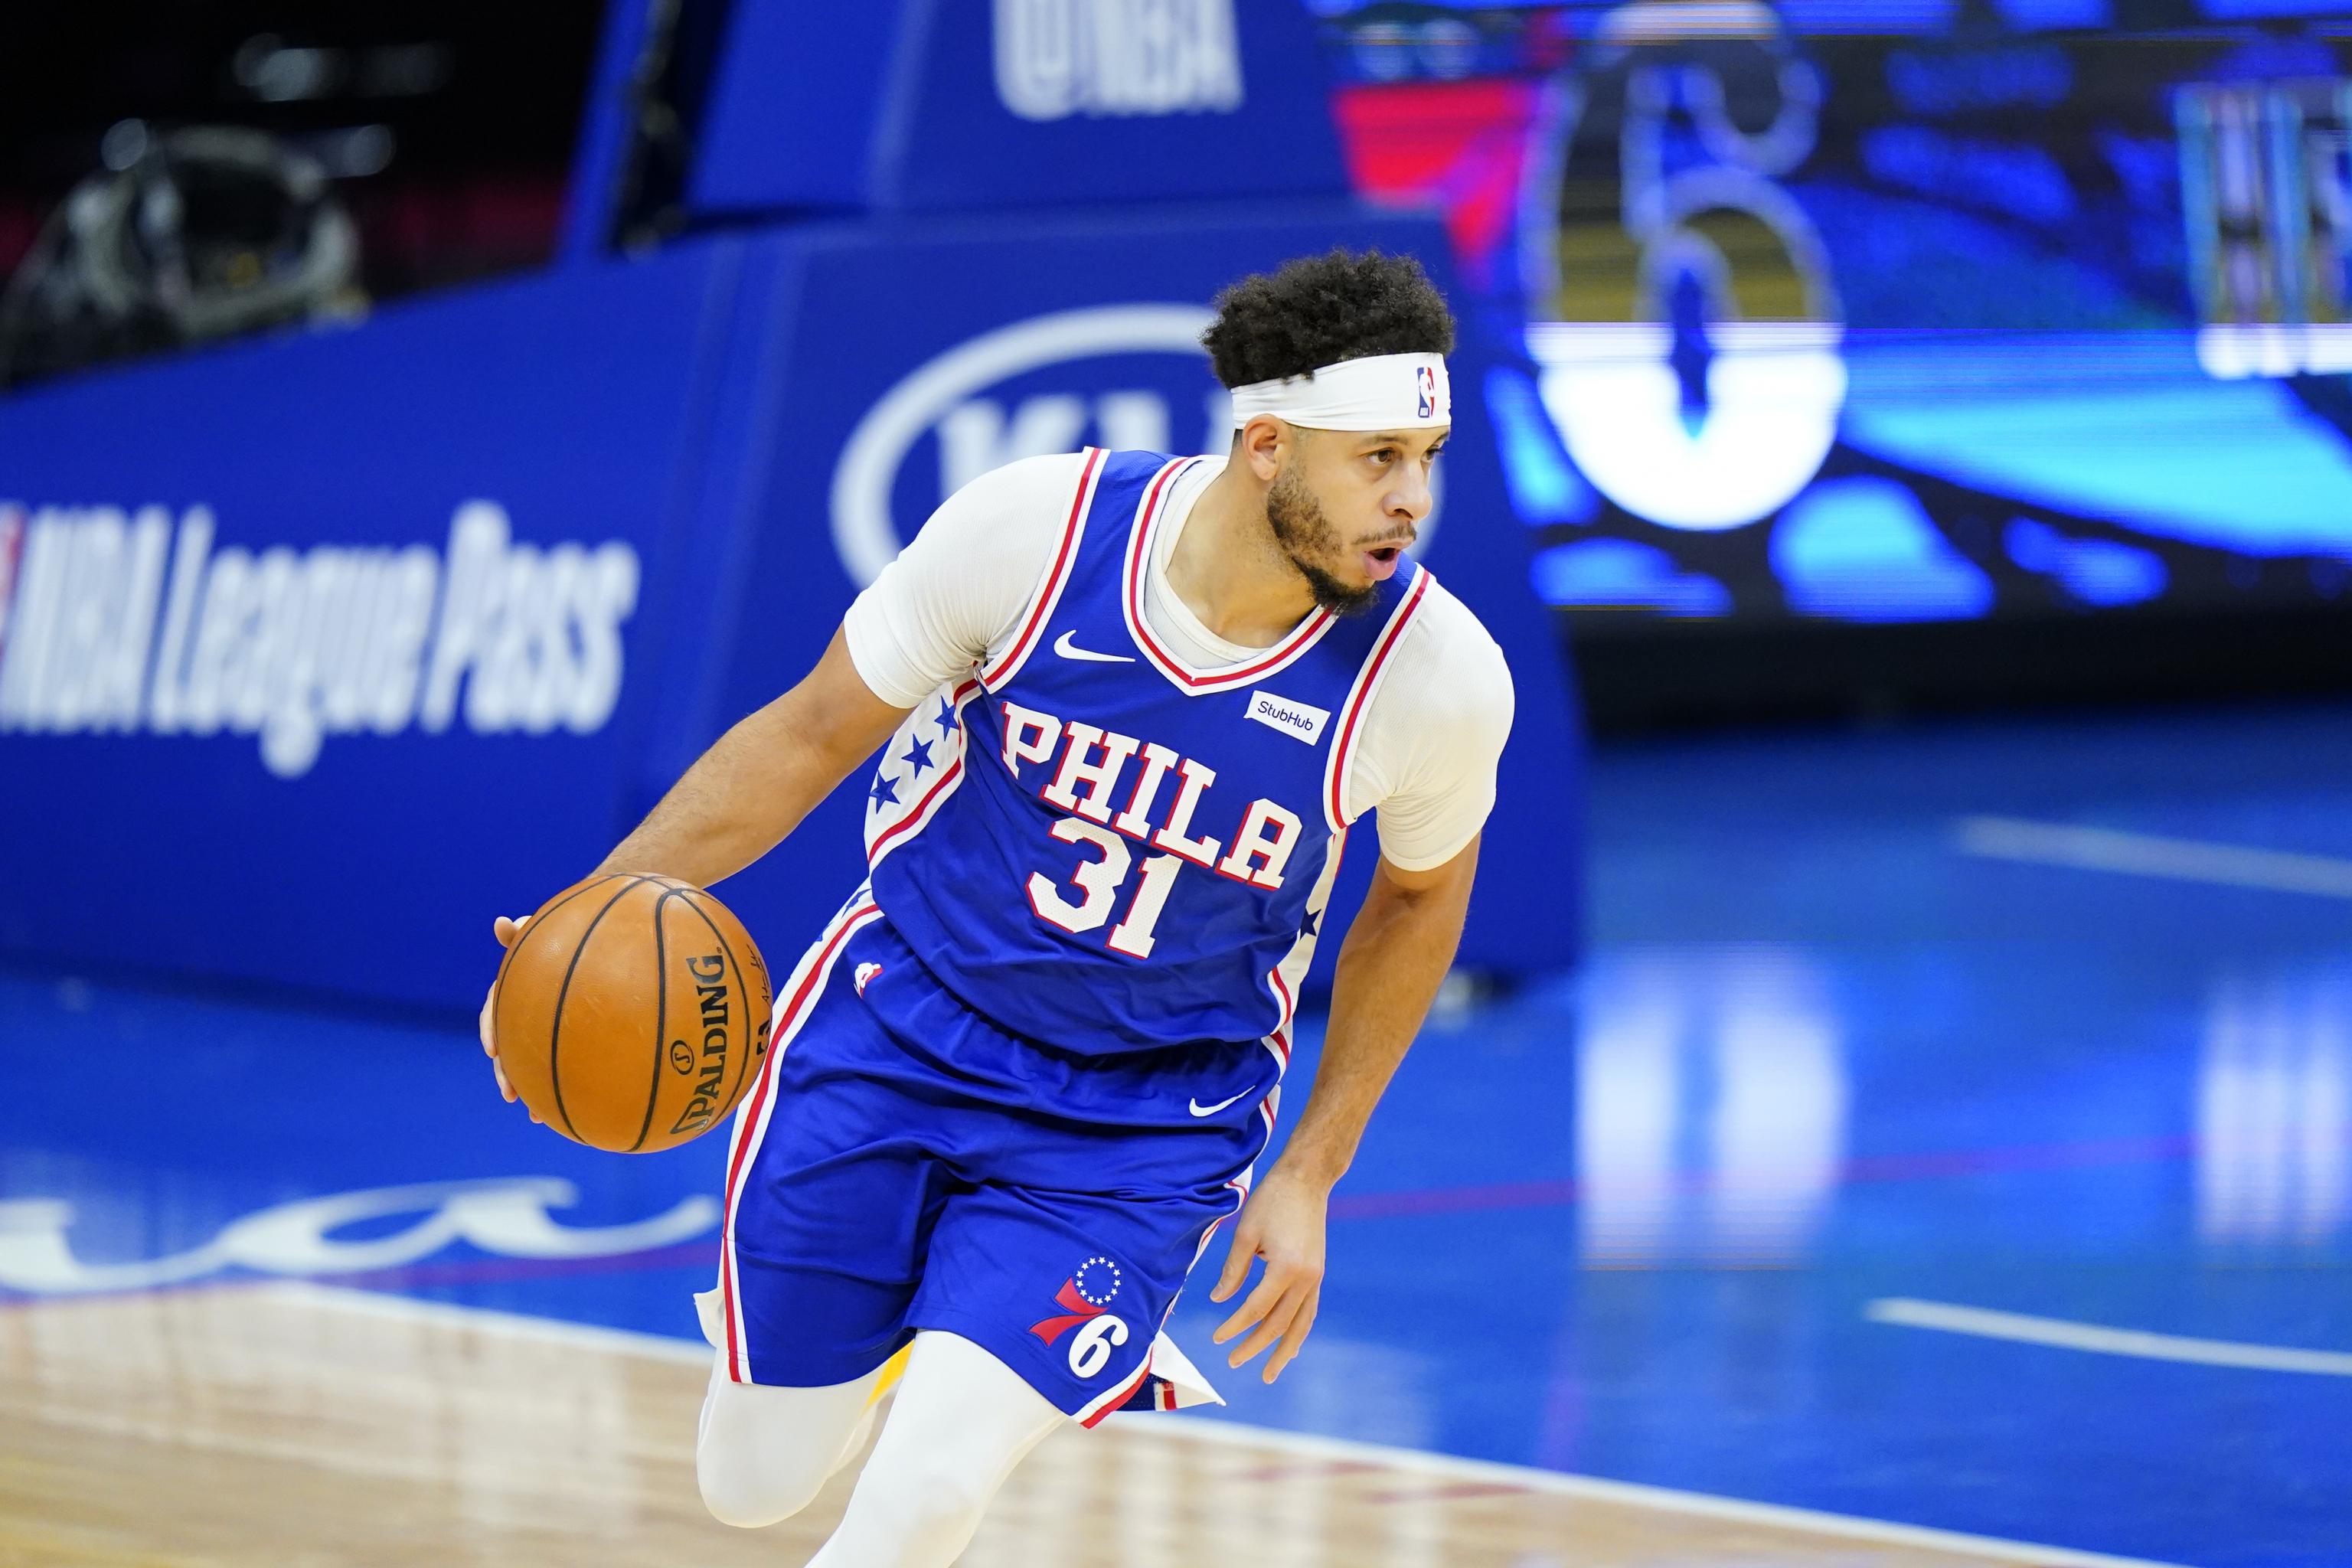 Carlisle's free-flowing system provides Mavericks' guard Seth Curry a lot  of comfort - The Official Home of the Dallas Mavericks